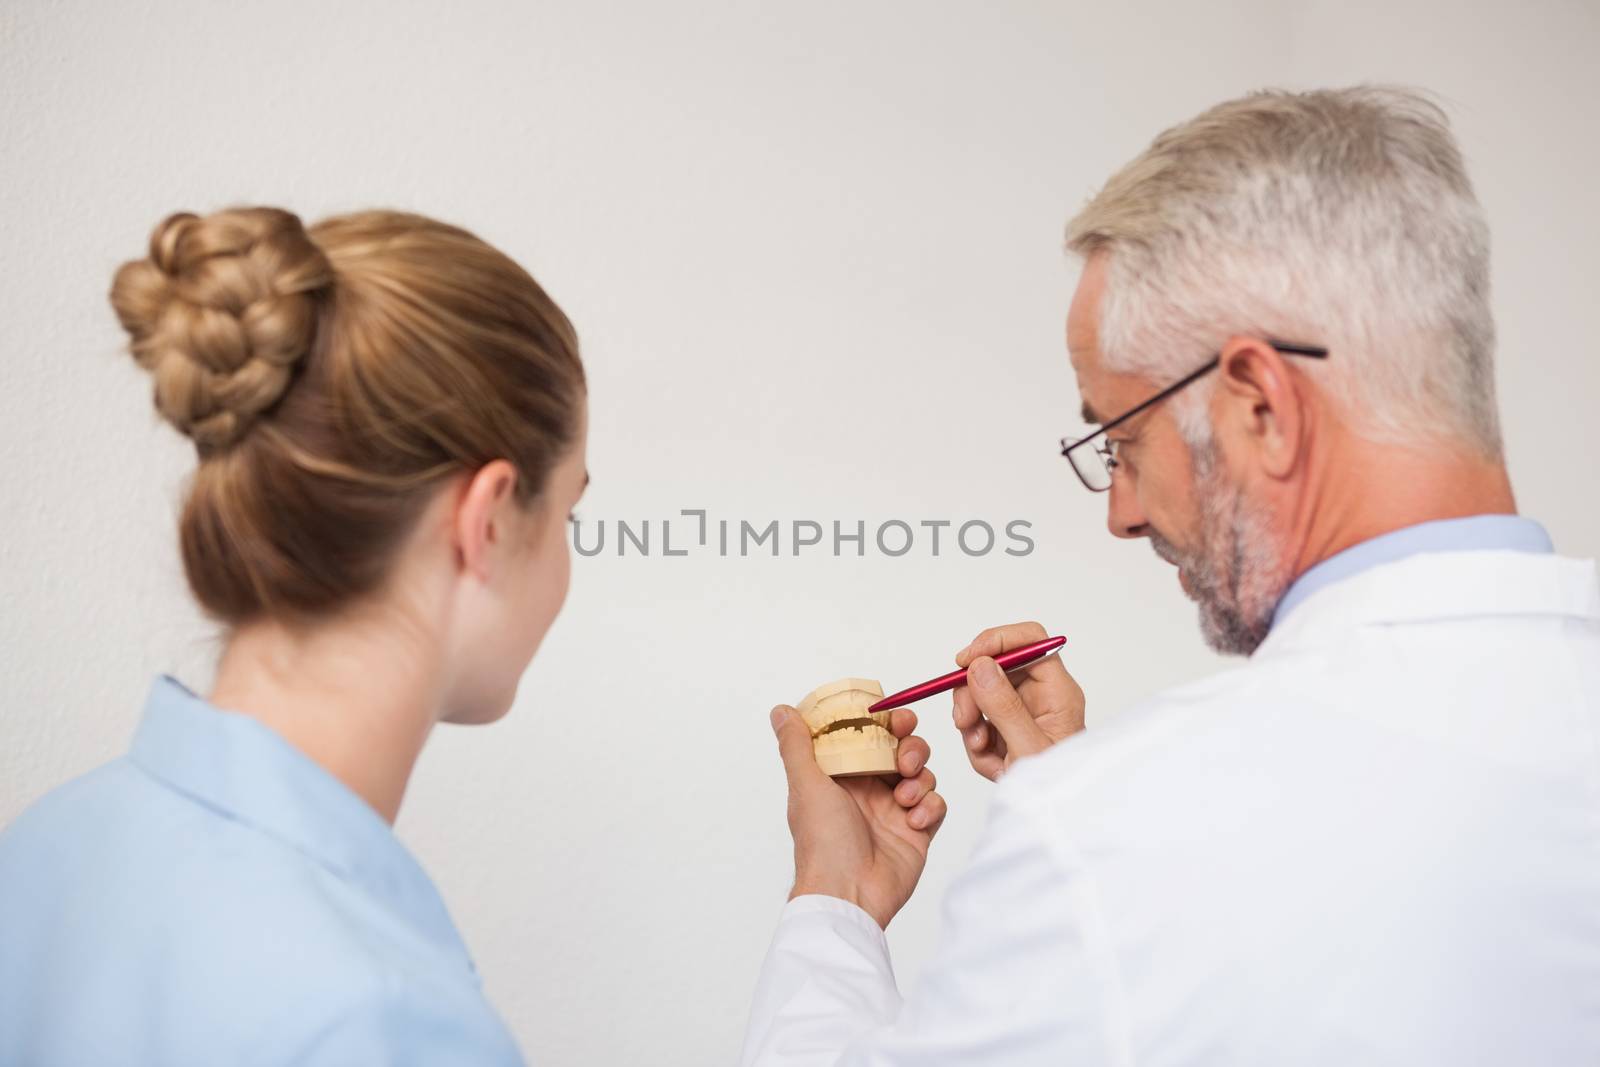 Dentist and assistant studying model of mouth by Wavebreakmedia